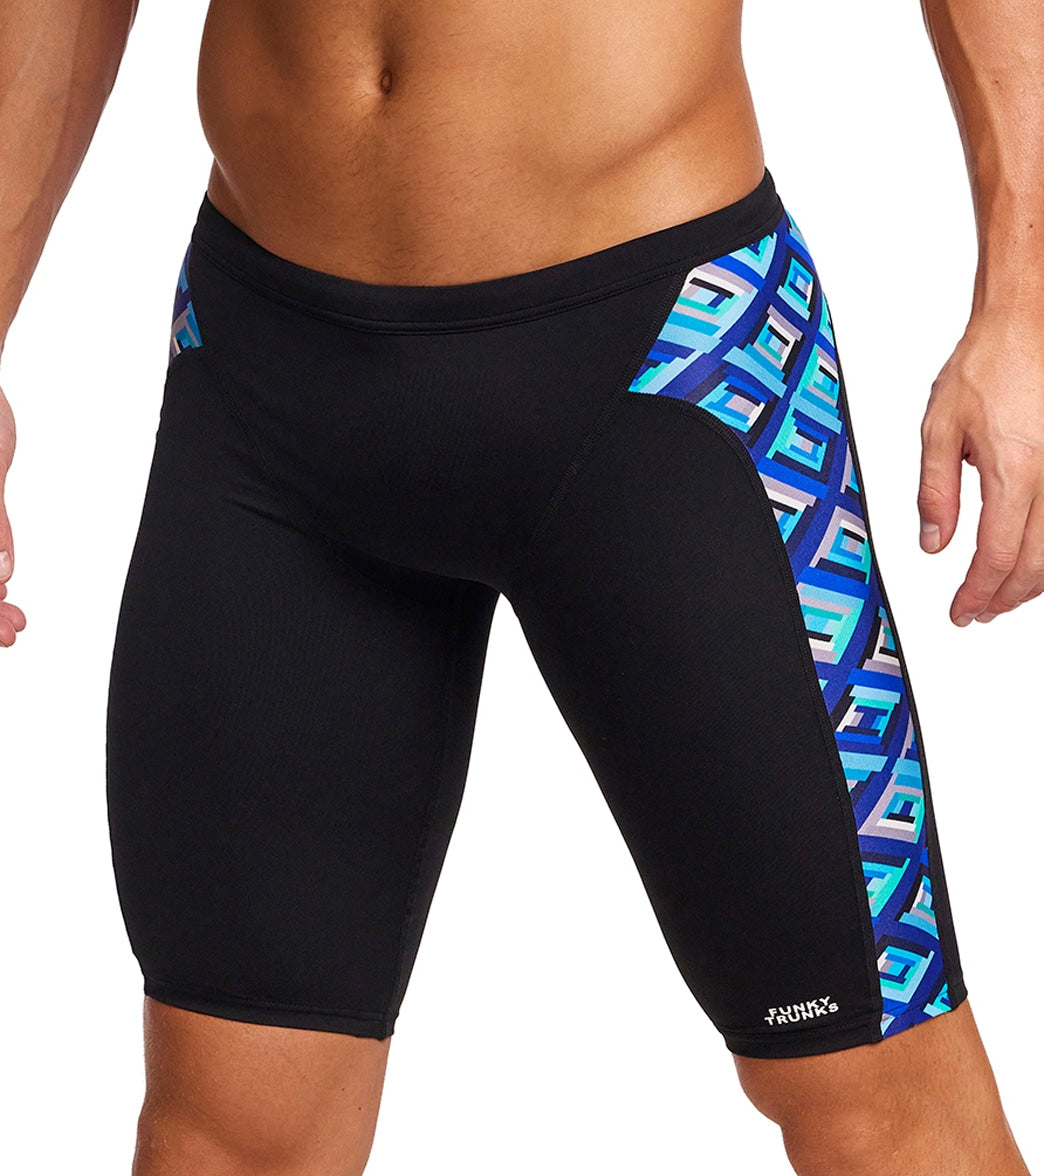 Funky Trunks Men's Blue Bunkers Jammer Swimsuit at SwimOutlet.com